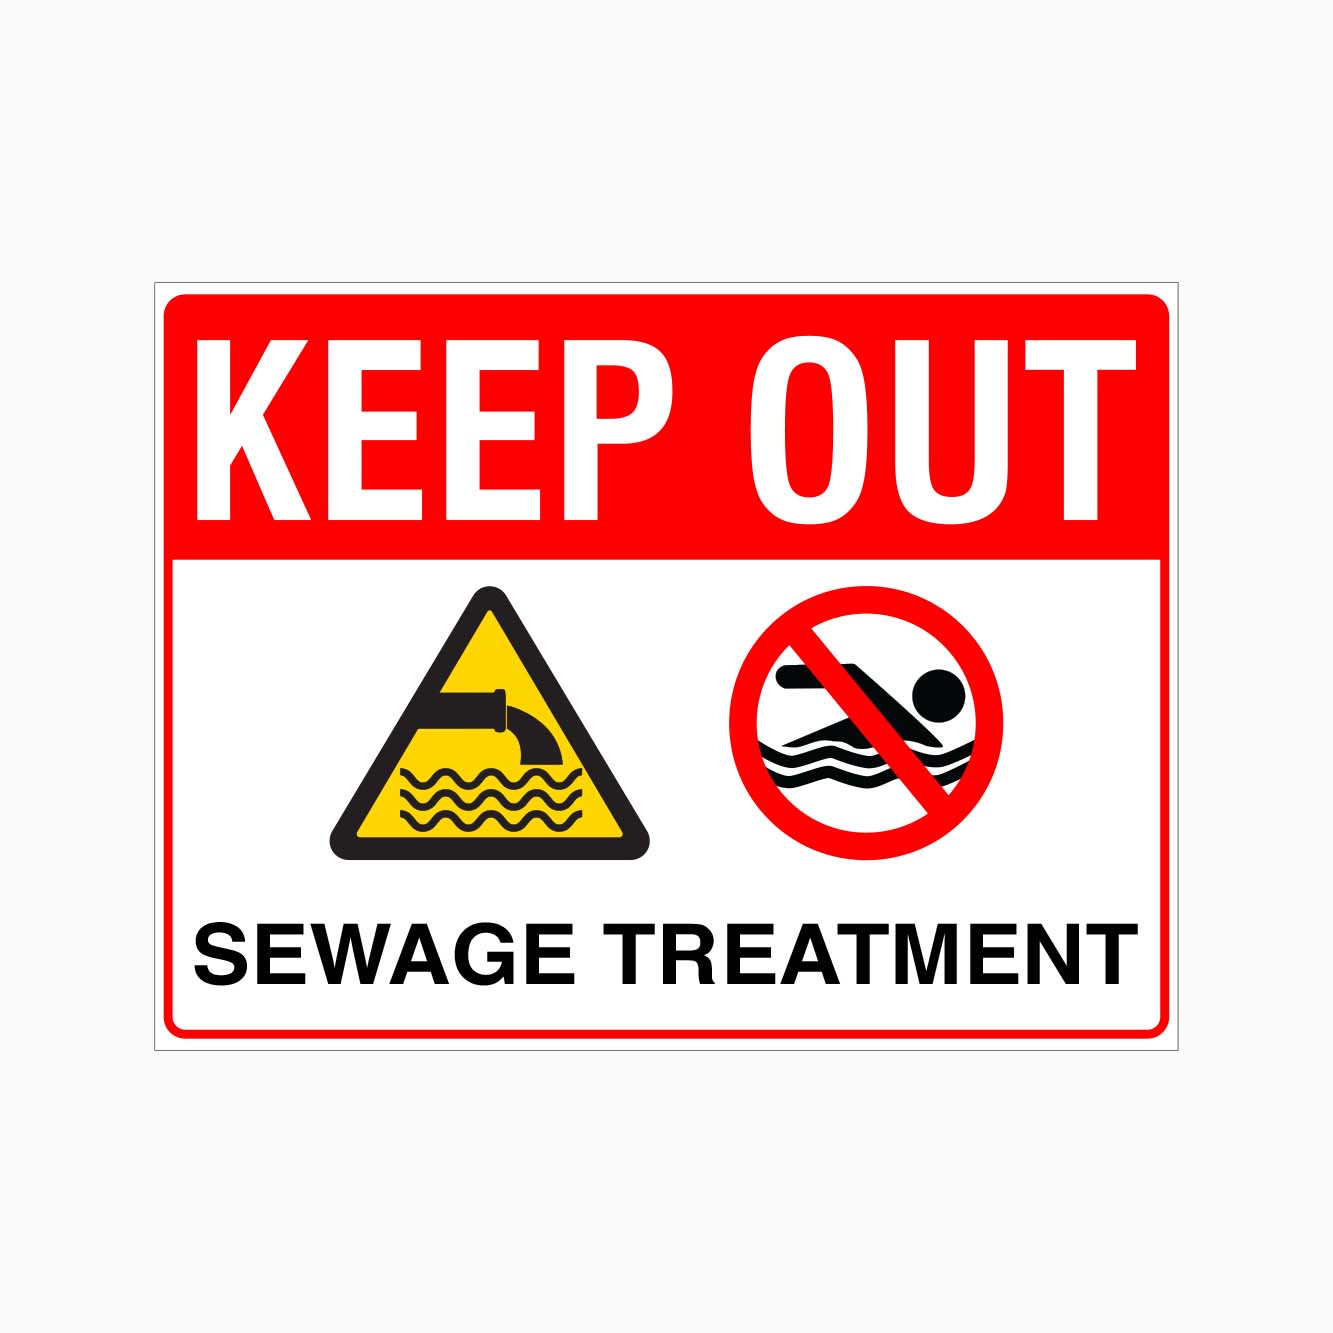 KEEP OUT SEWAGE TREATMENT SIGN - GET SIGNS